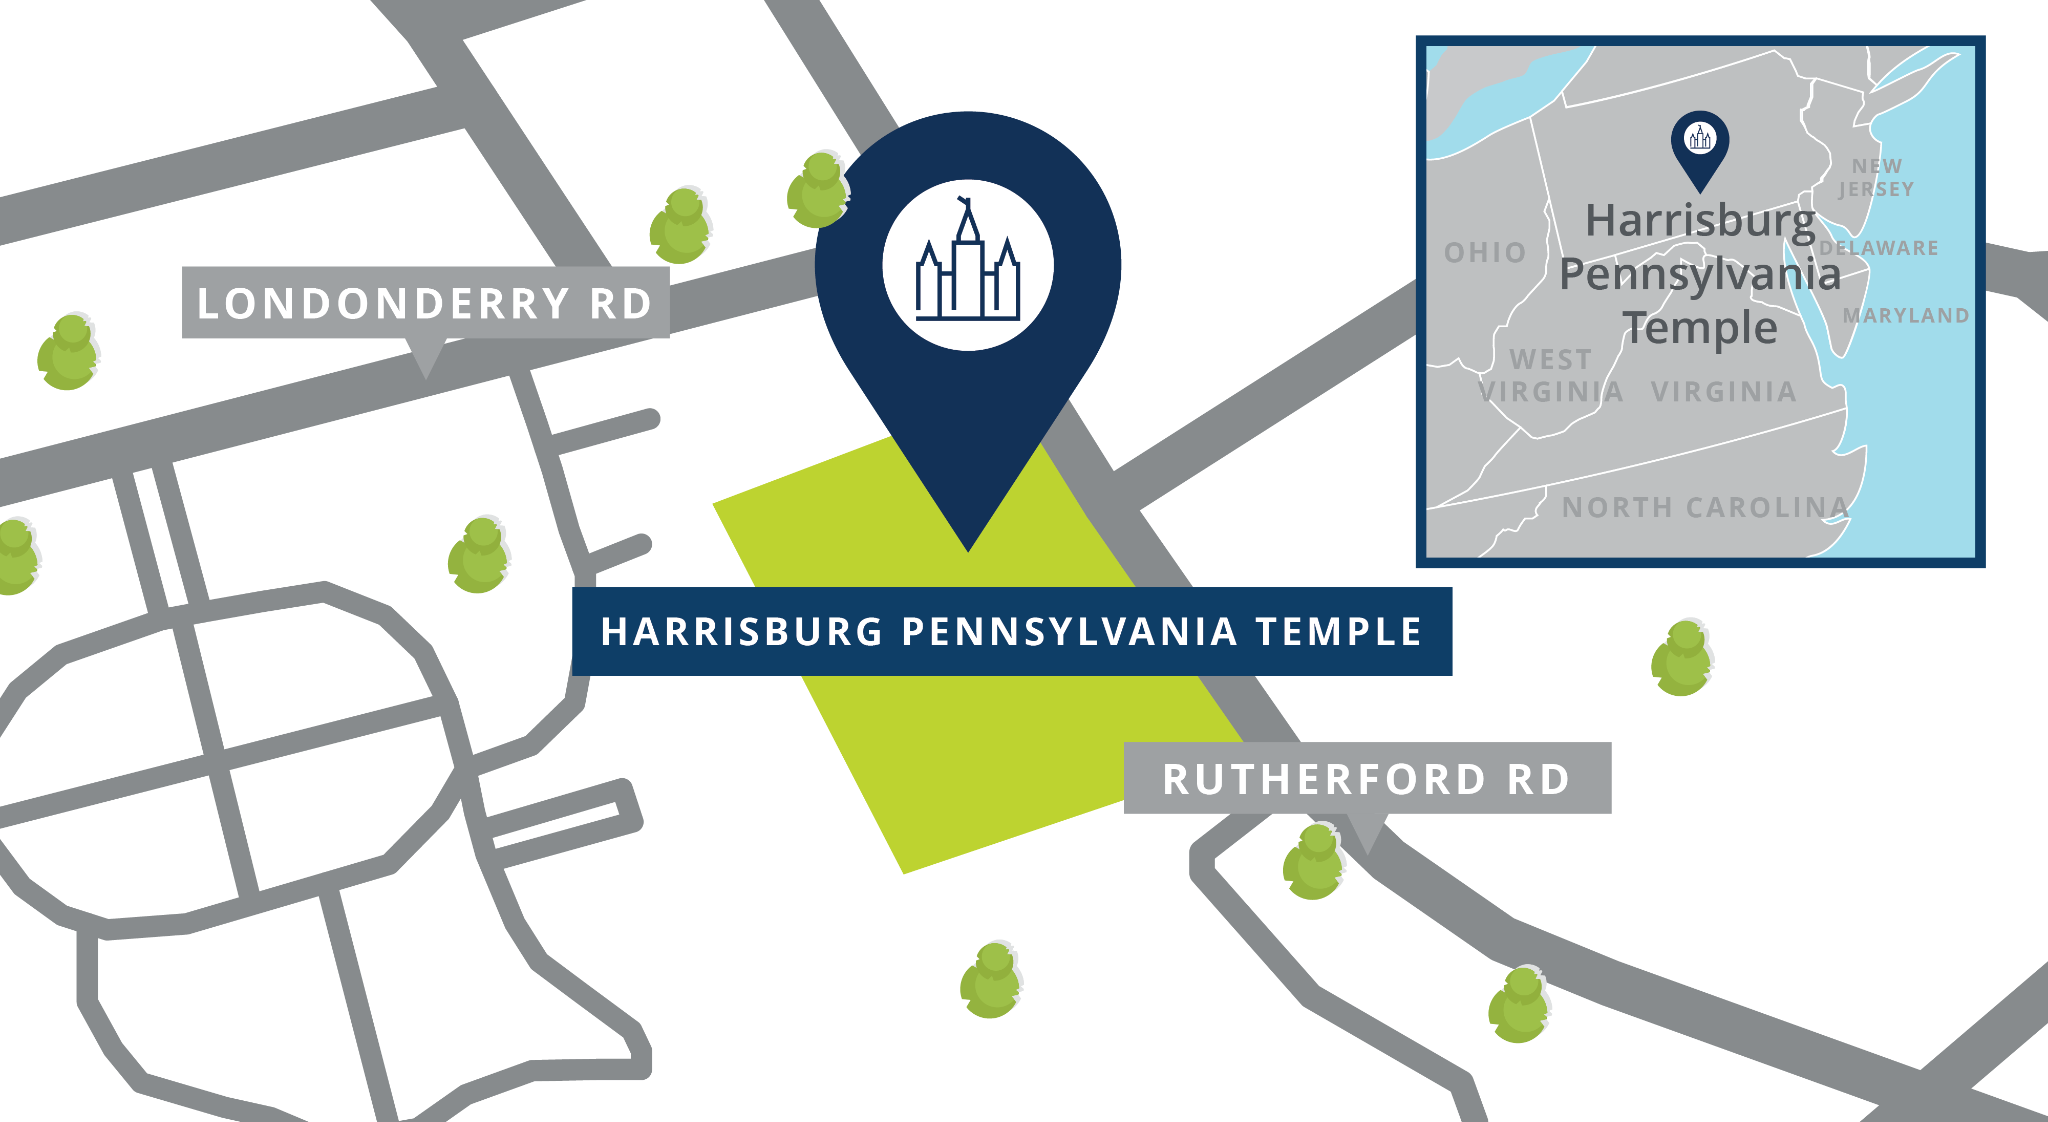 A map of a pin showing the location of the Harrisburg Pennsylvania Temple site, with nearby roads.